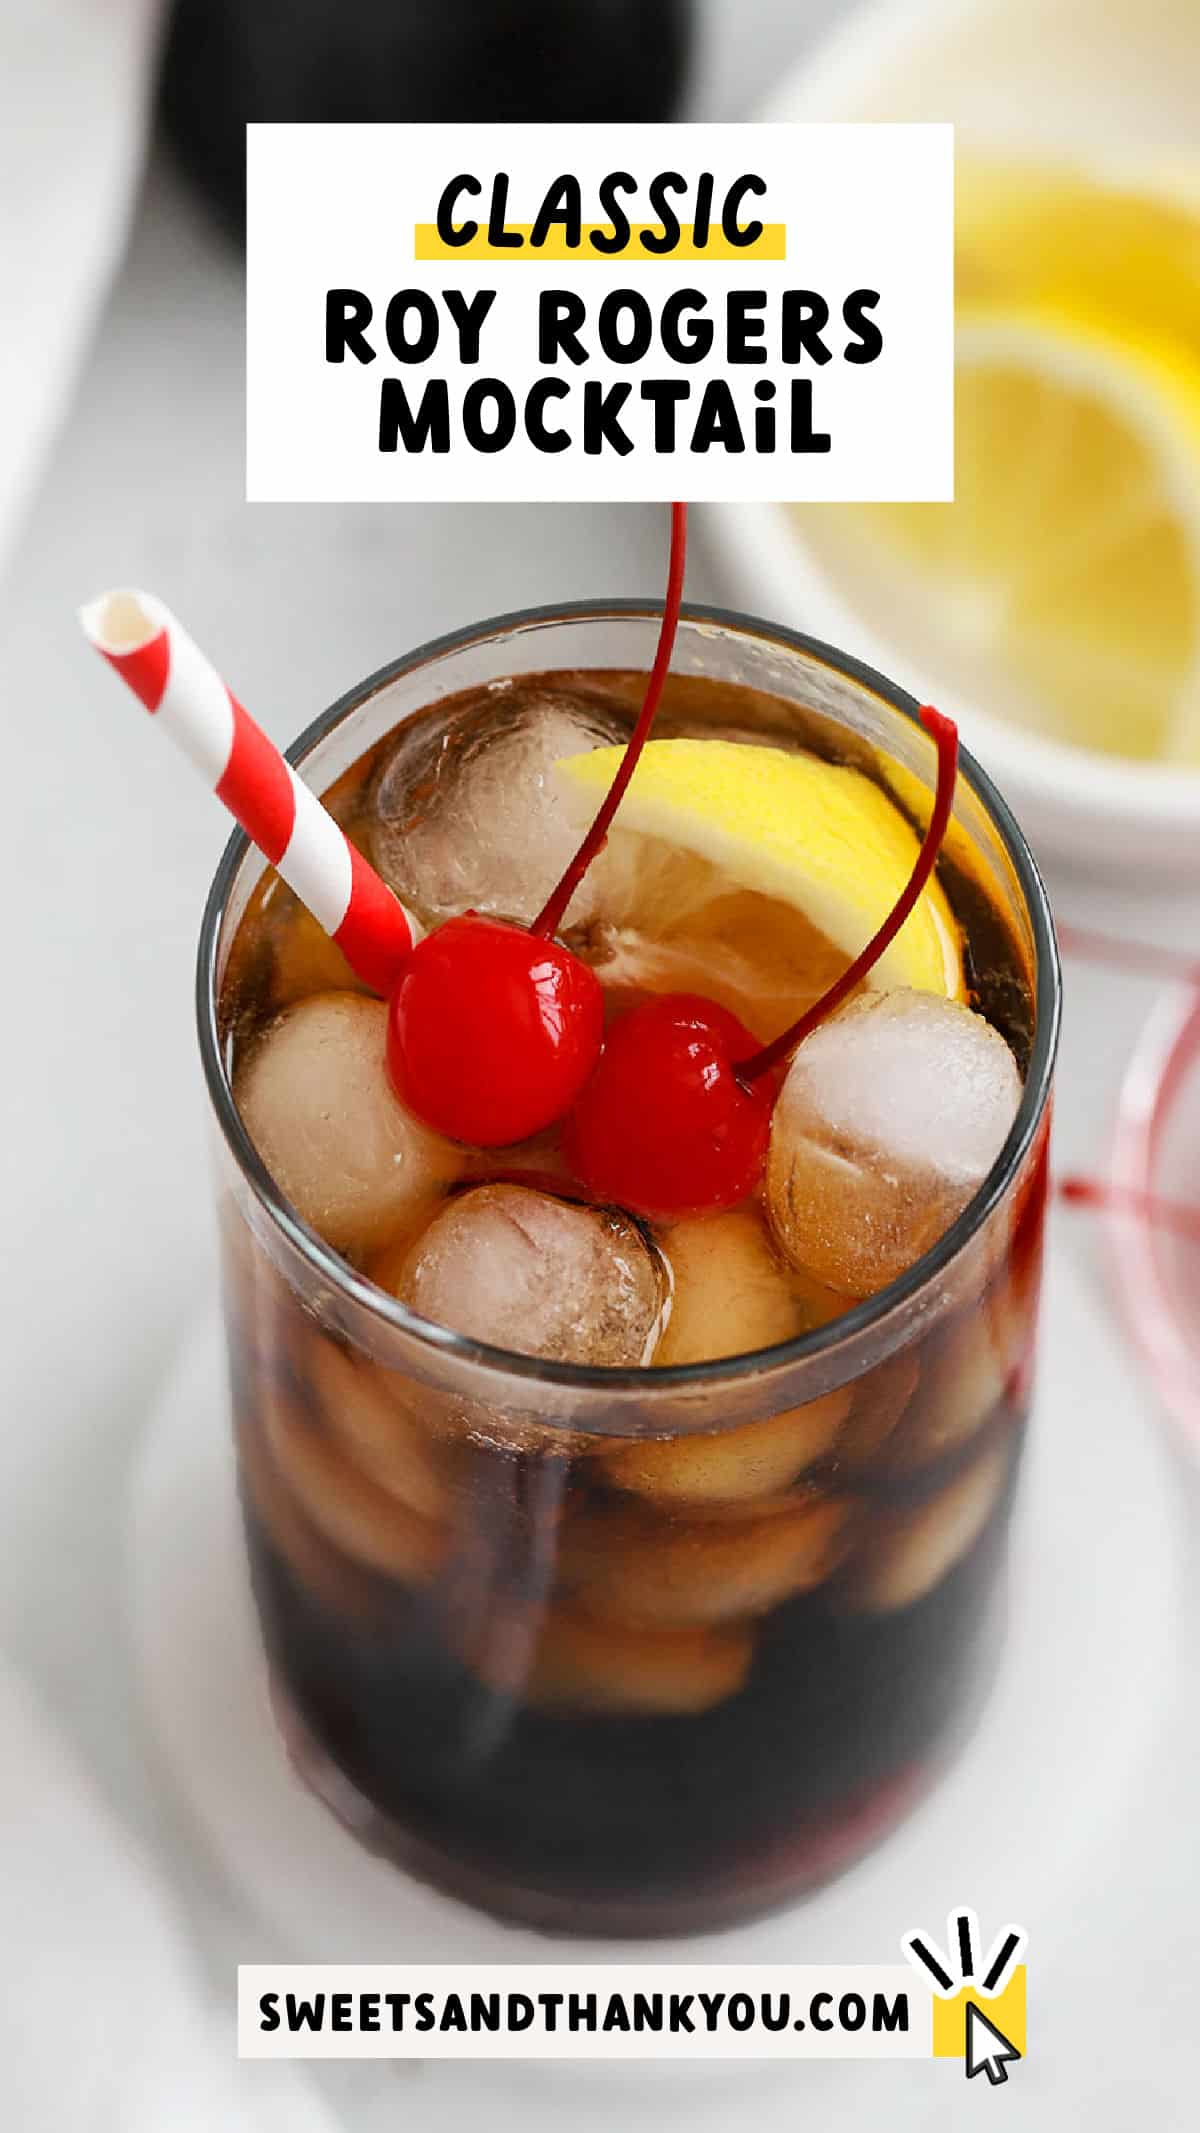 Learn how to make a Roy Rogers drink! This classic mocktail recipe is made with just 2-3 ingredients and makes a fun addition to parties and celebrations. While the basic recipe for this cola mocktail might be a famous kids mocktail recipe, we've also got a delicious lower sugar twist that's perfect for grown-ups. Get the recipe + more tips and classic mocktail recipes to try at sweetsandthankyou.com